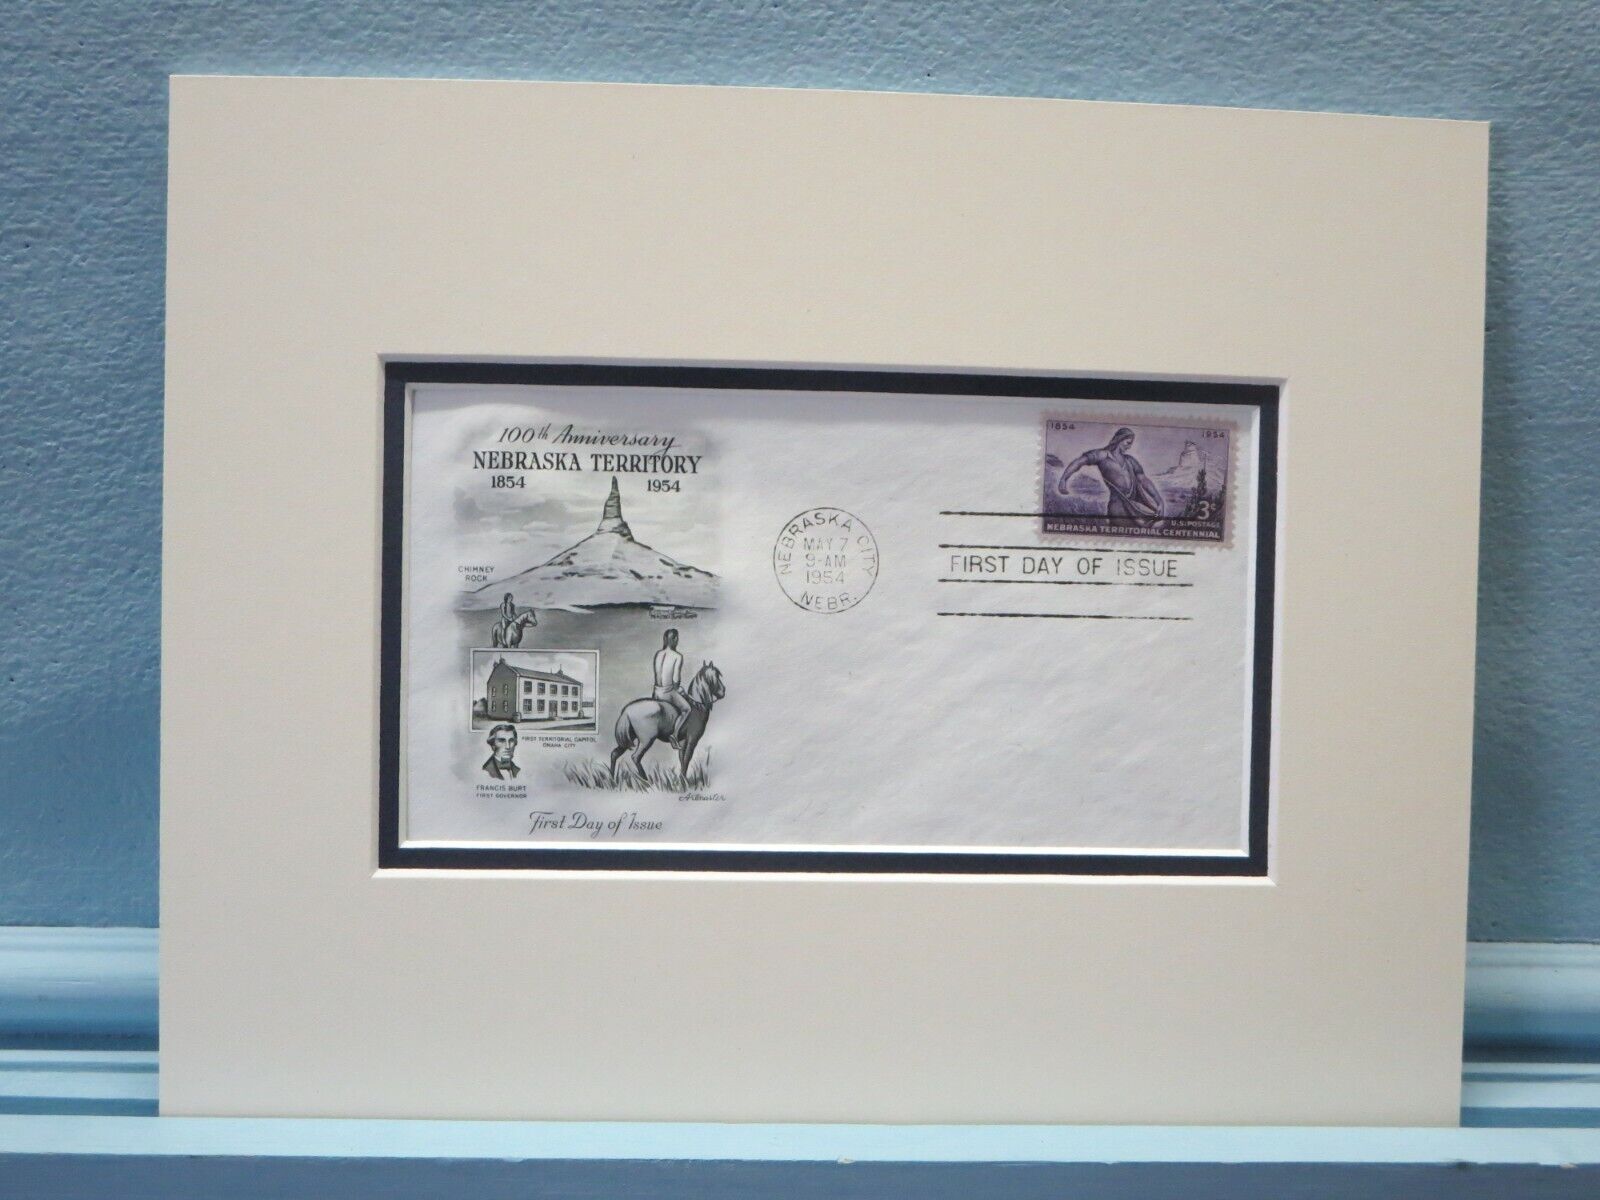 1854 - Nebraska Territory Established  & First Day Cover for 100th Anniversary 